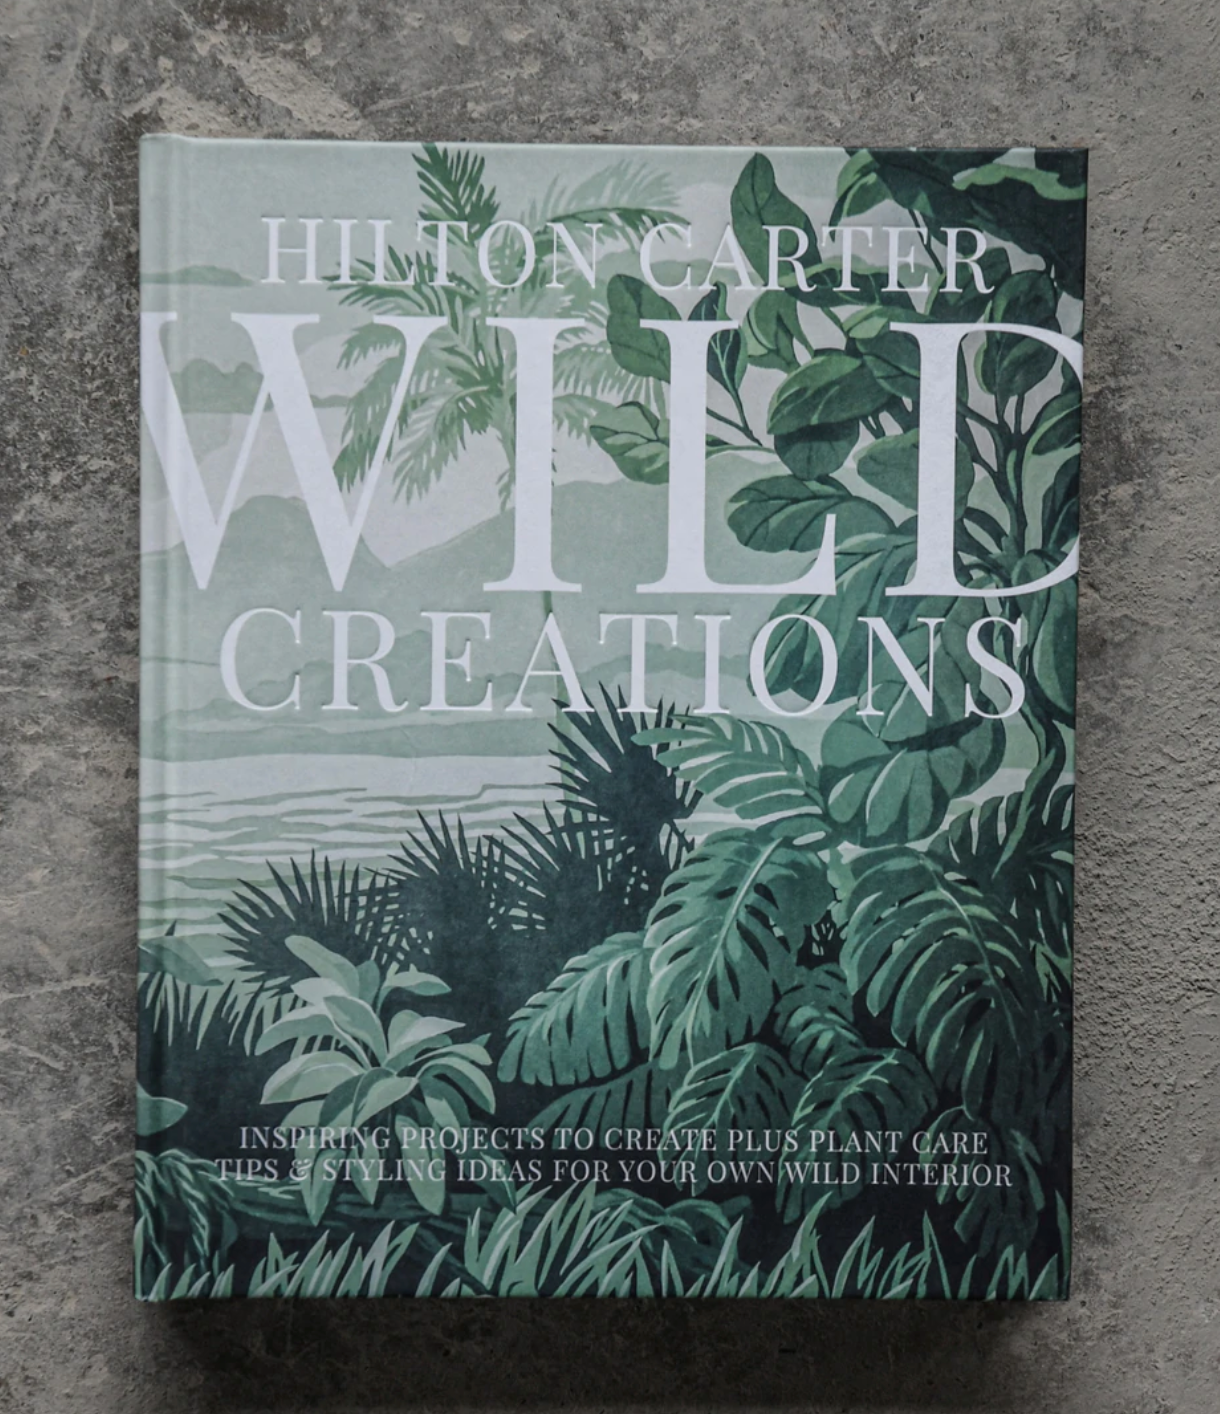 Wild Creations by HIlton Carter